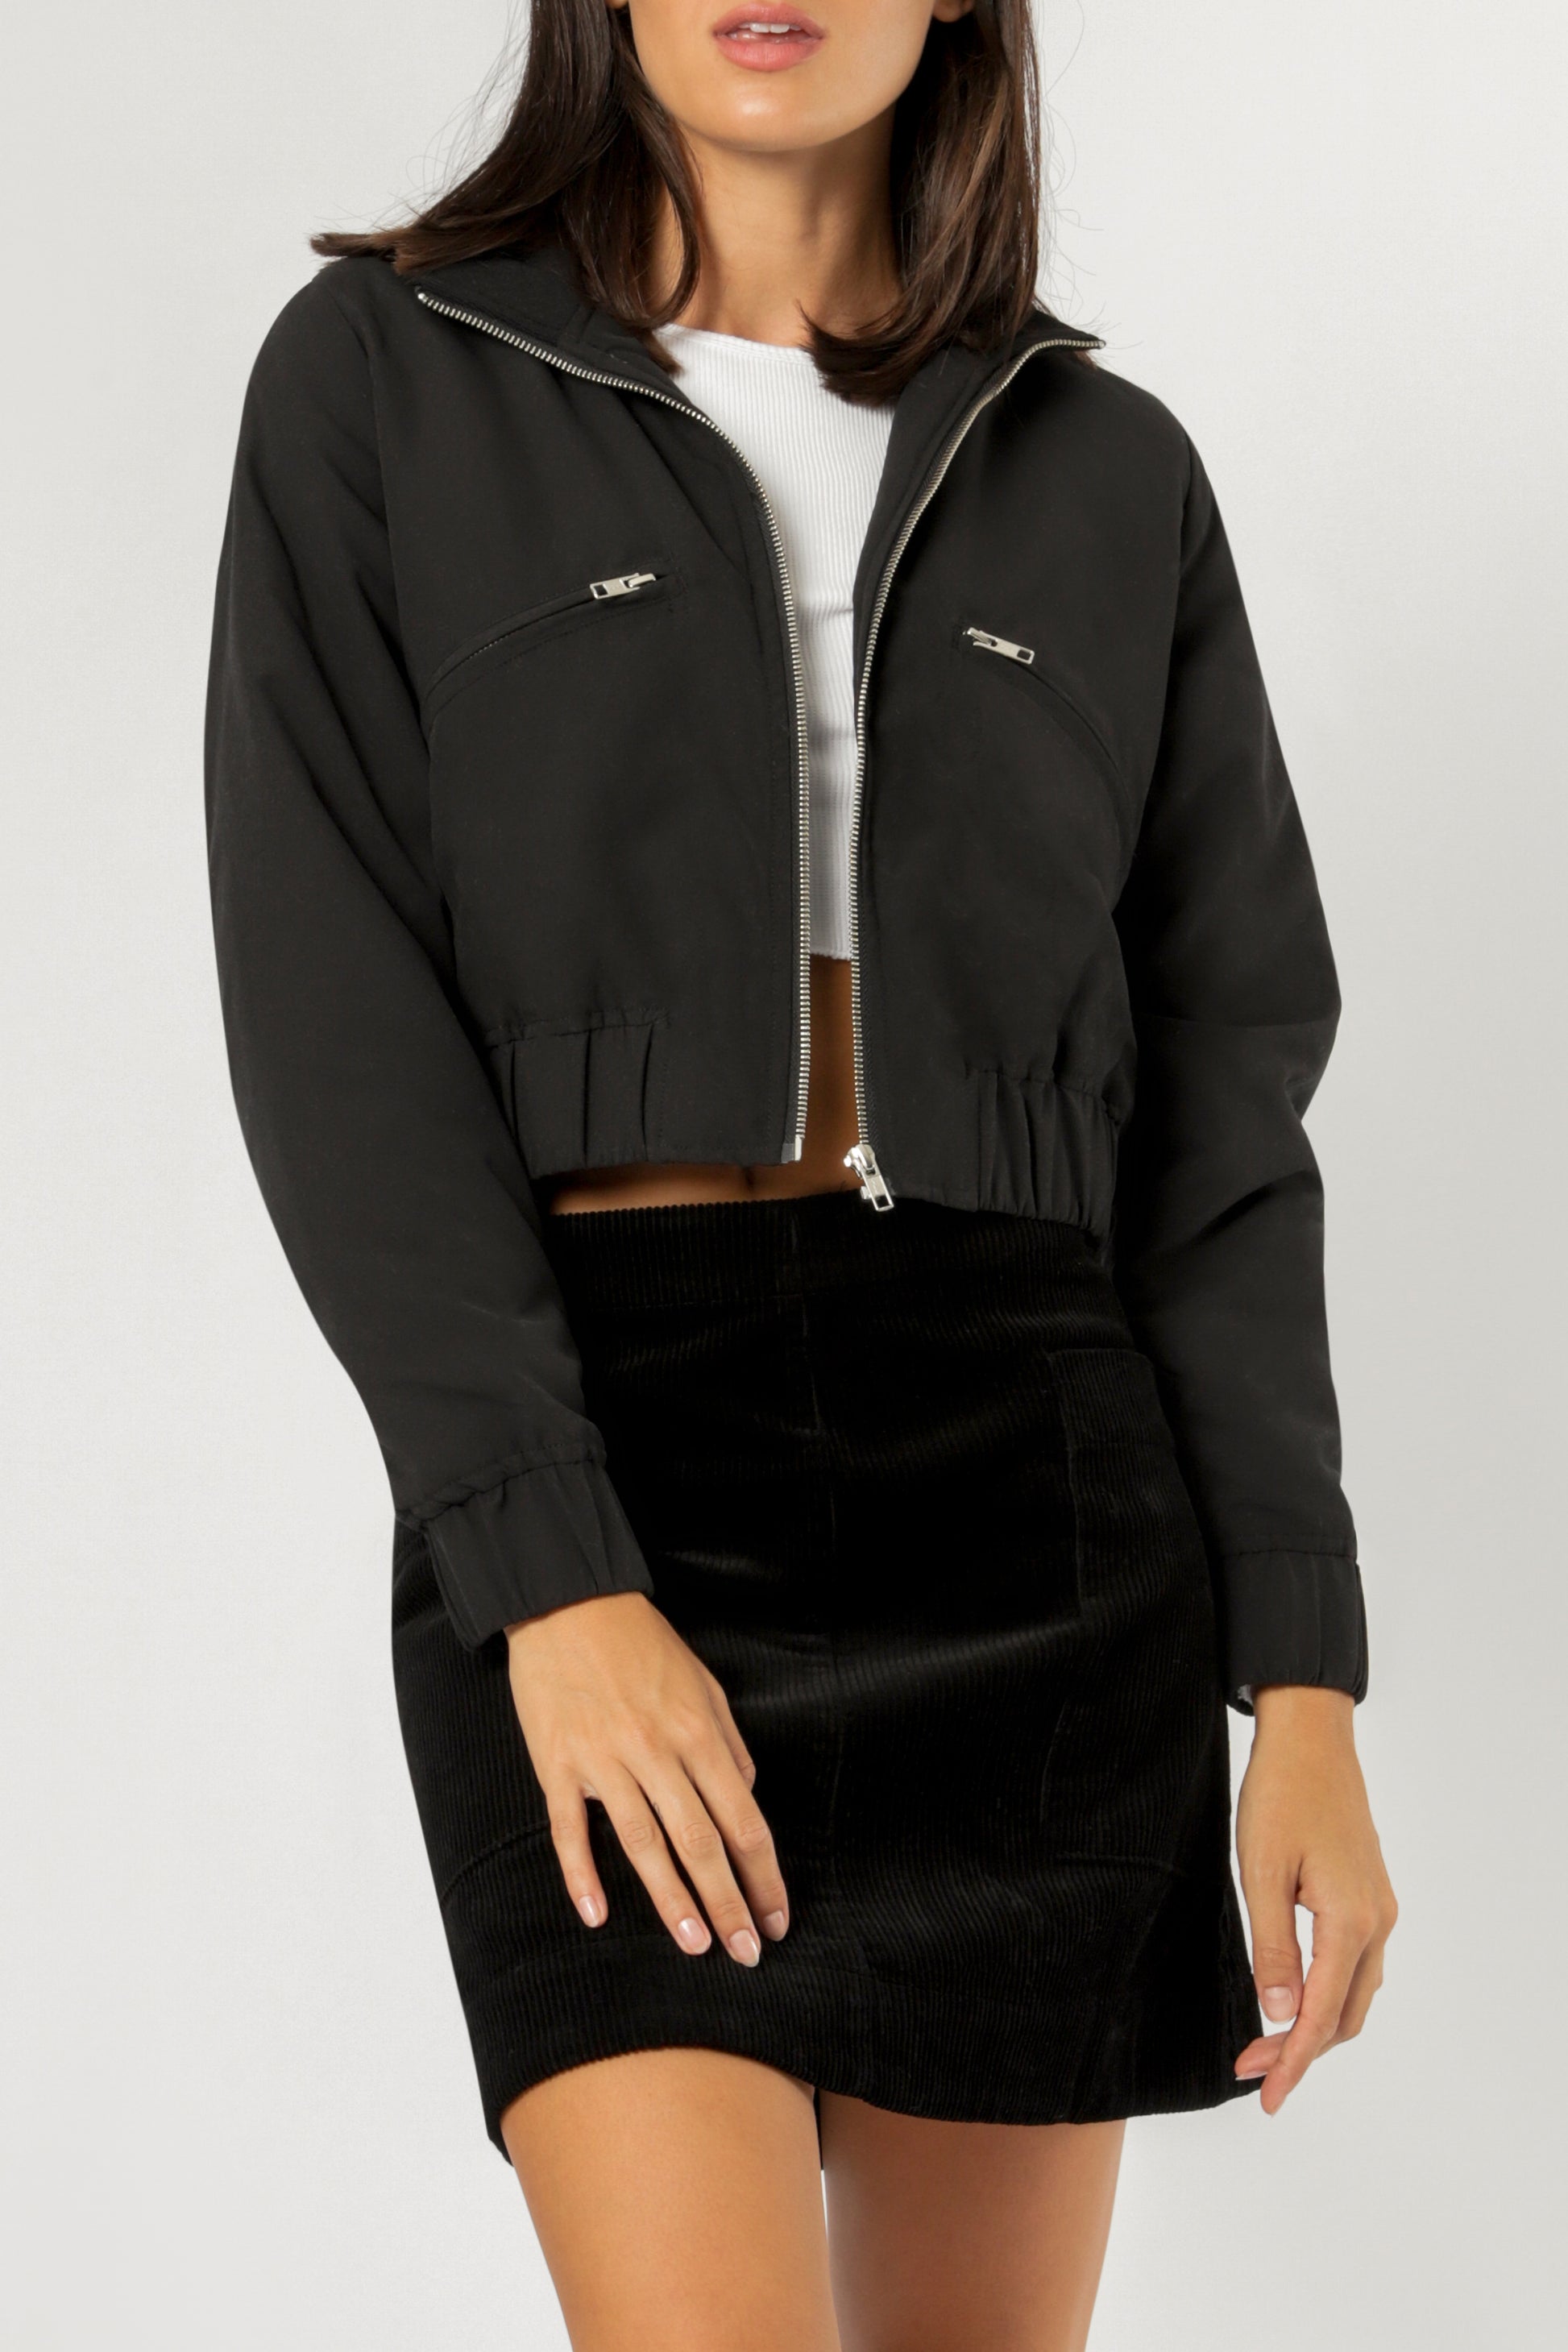 Nude Lucy Tegan Bomber Black Jackets 